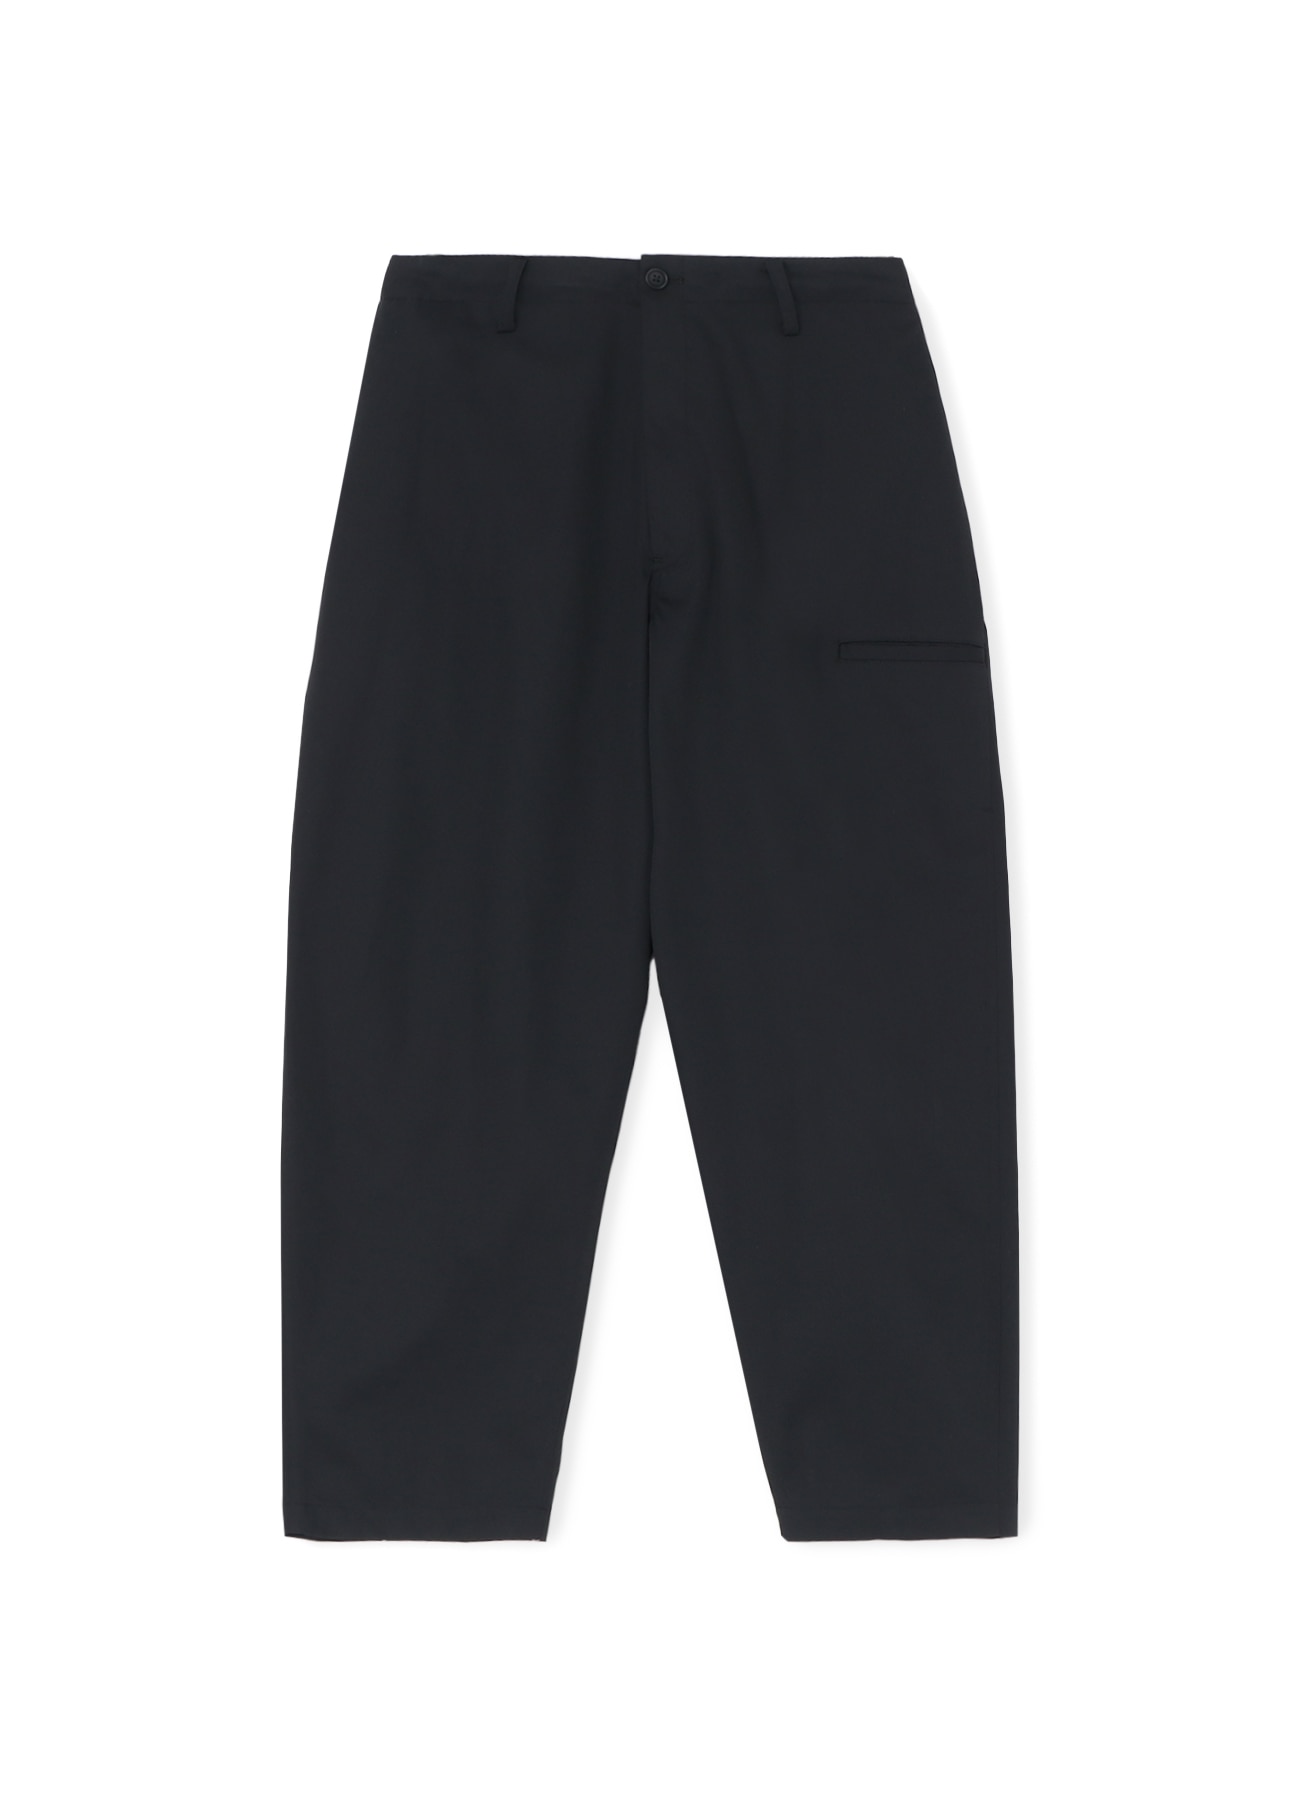 POLYESTER/COTTON TWILL PANTS WITH SIDE POCKET(S BLACK): Y's for 